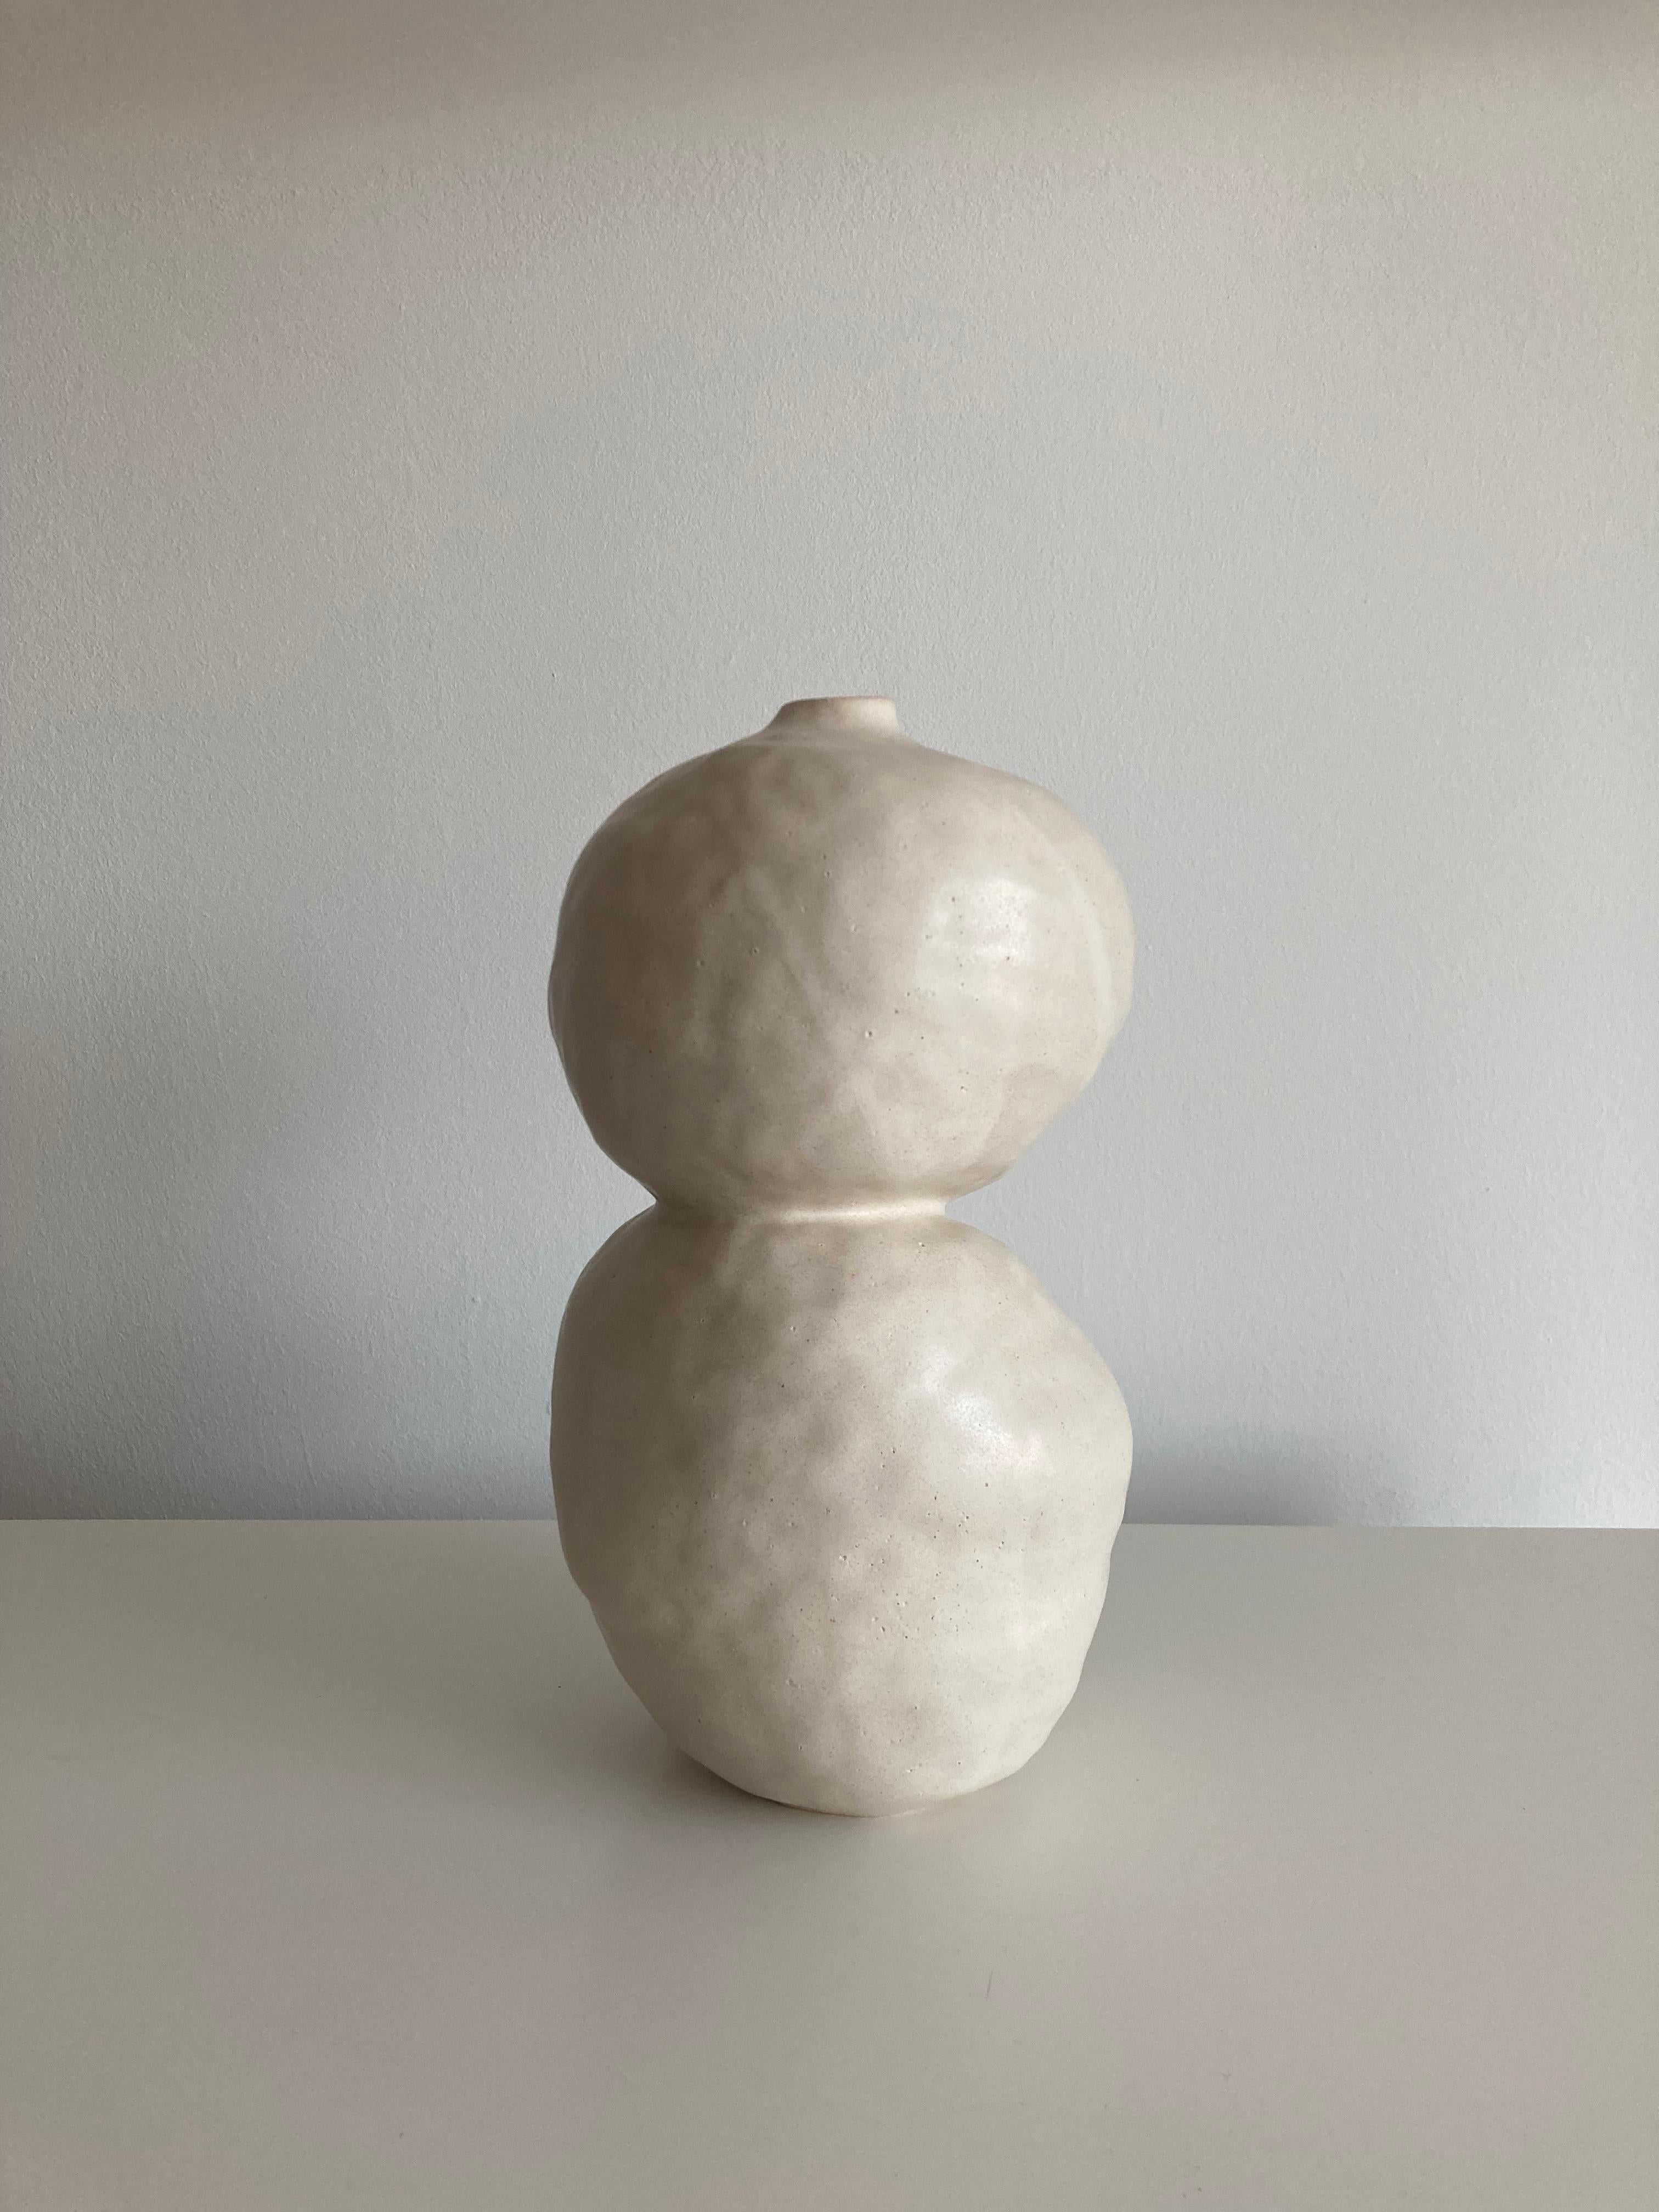 No.103 stoneware sculpture, tonfisk by Ciona Lee 
One of a Kind
Dimensions: Ø 13 x H 24 cm
Materials: White stoneware, satin cream glaze
Variations of size and colour available

Tonfisk is the ceramic practice by Ciona Lee, a Korean-Italian